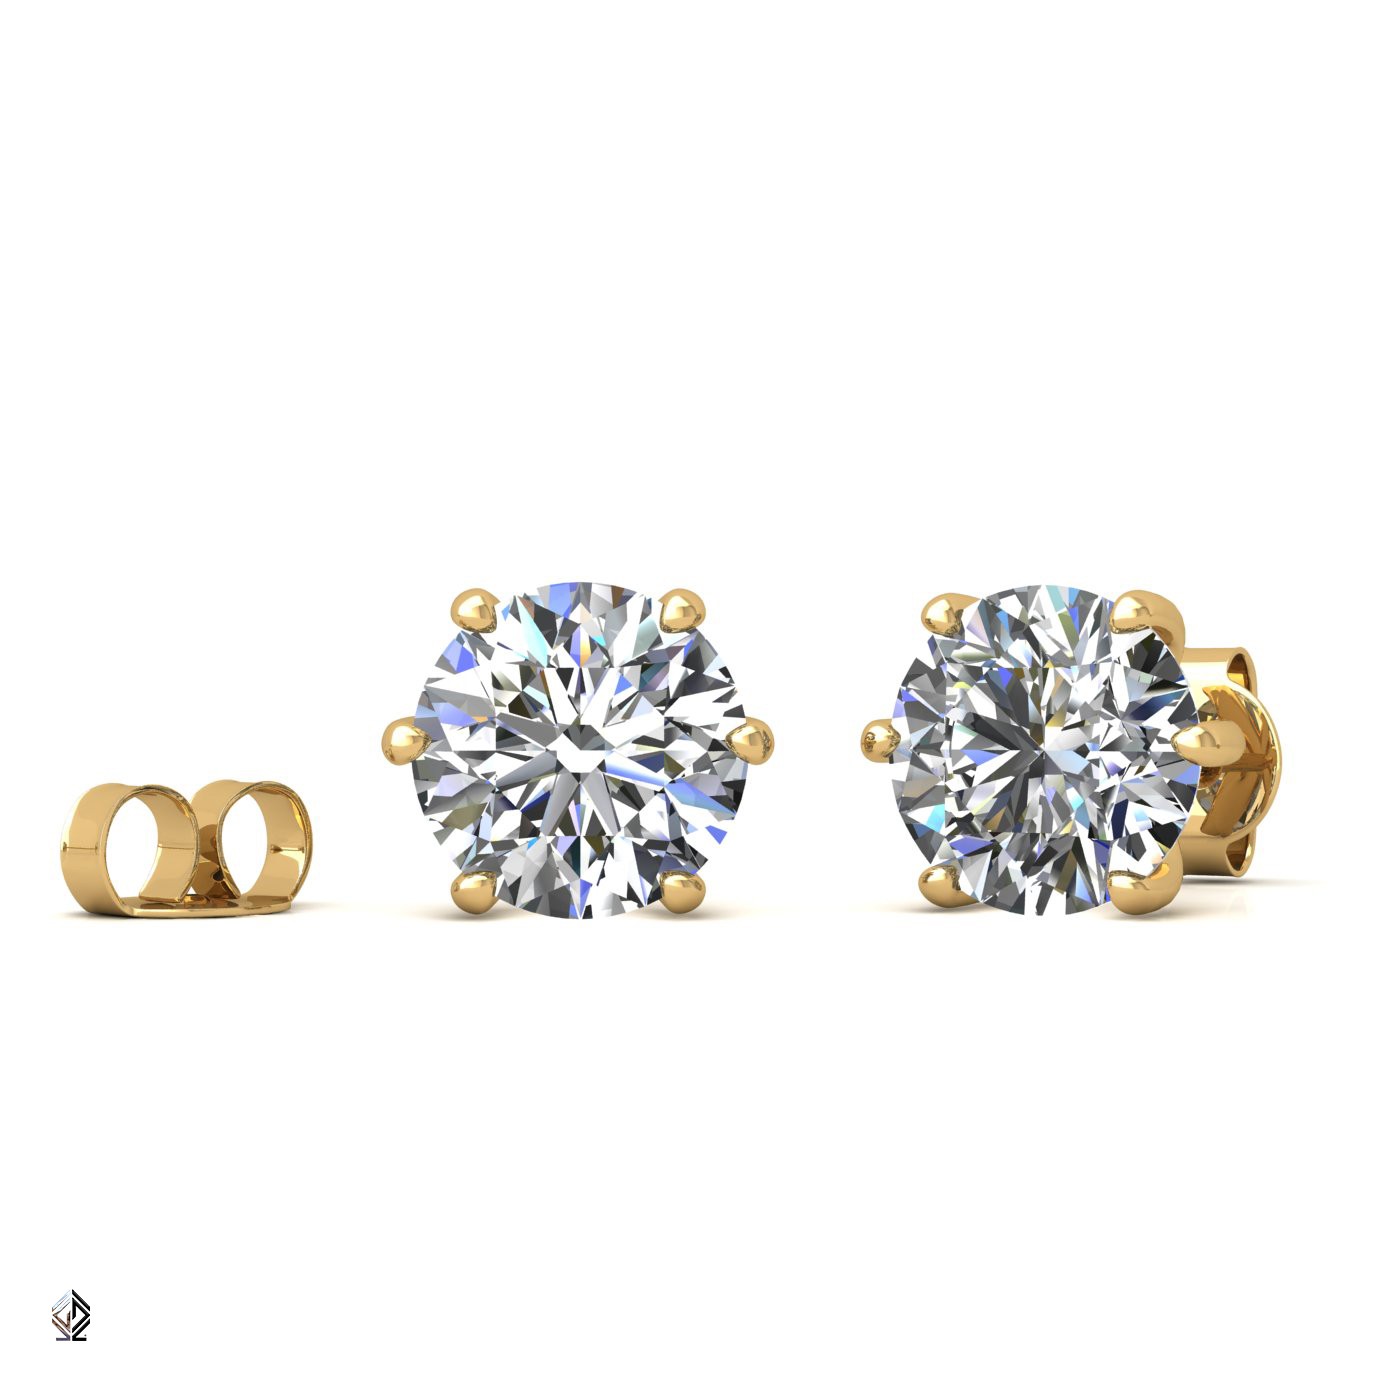 18k yellow gold 0,7 ct each (1,4 tcw) 6 prongs round shape diamond earrings Photos & images